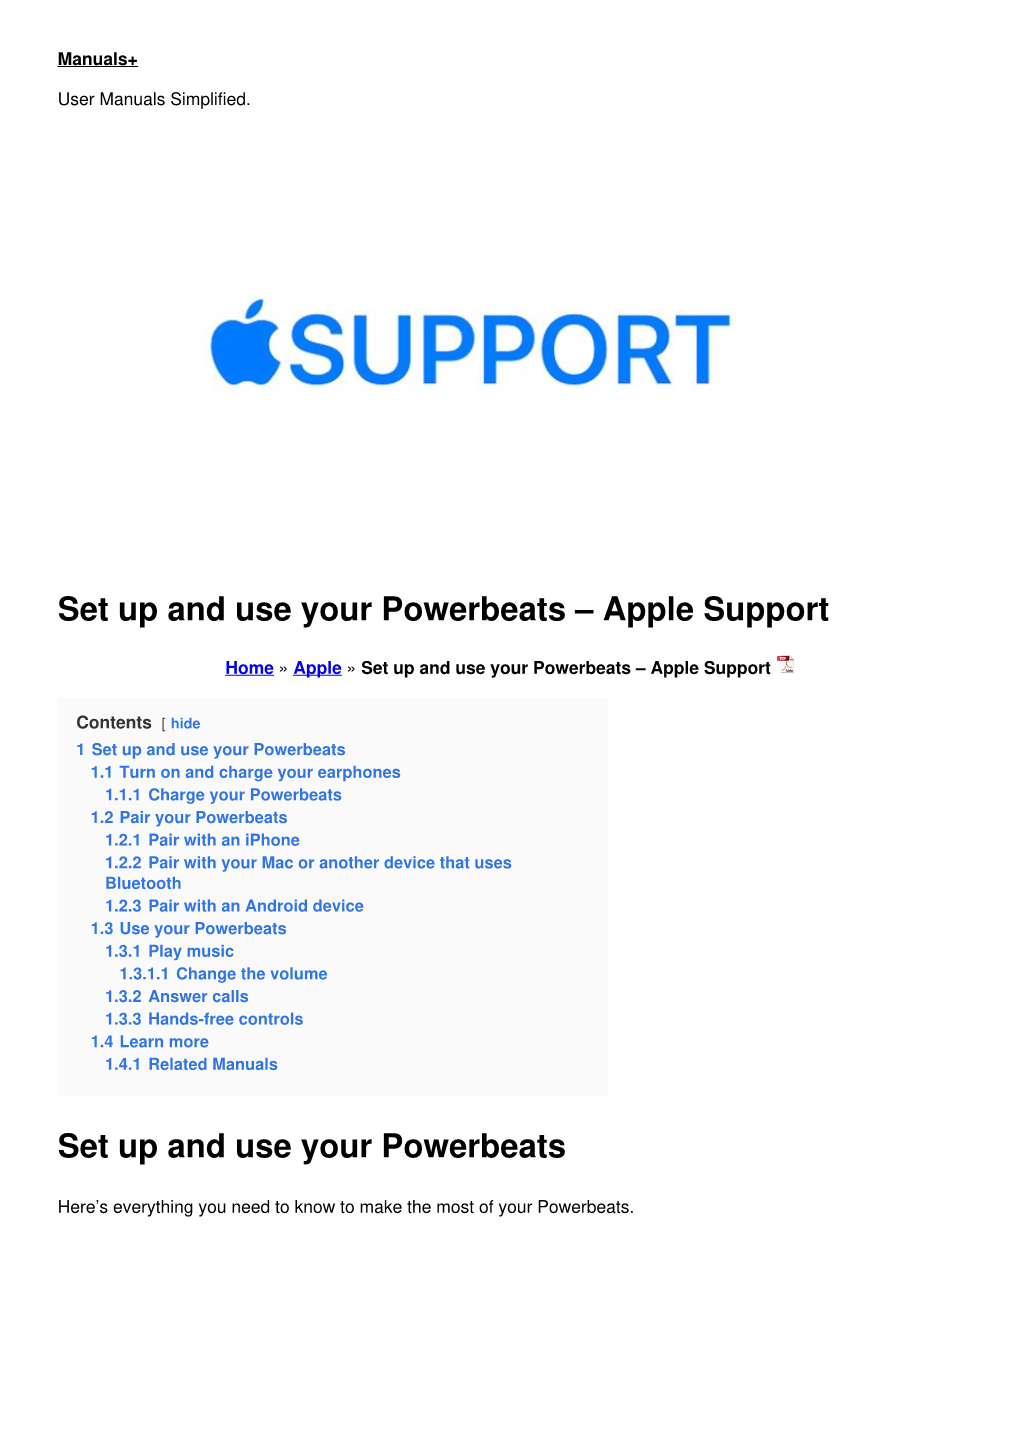 Set up and Use Your Powerbeats – Apple Support